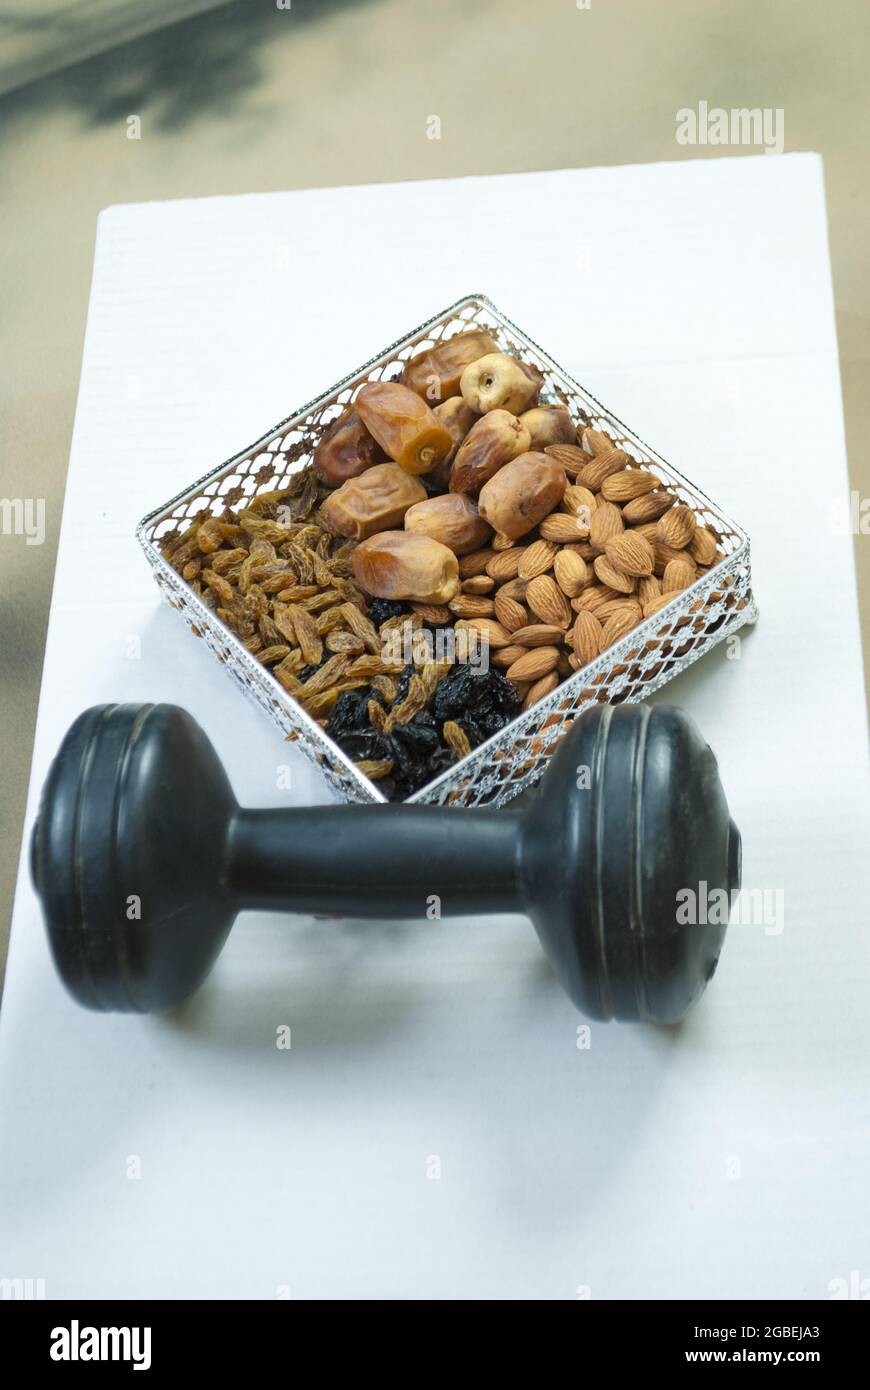 gym workout food organic healthy mix dry fruits with dumbbell golden and black raisins dates almonds exercise concept space for text Stock Photo